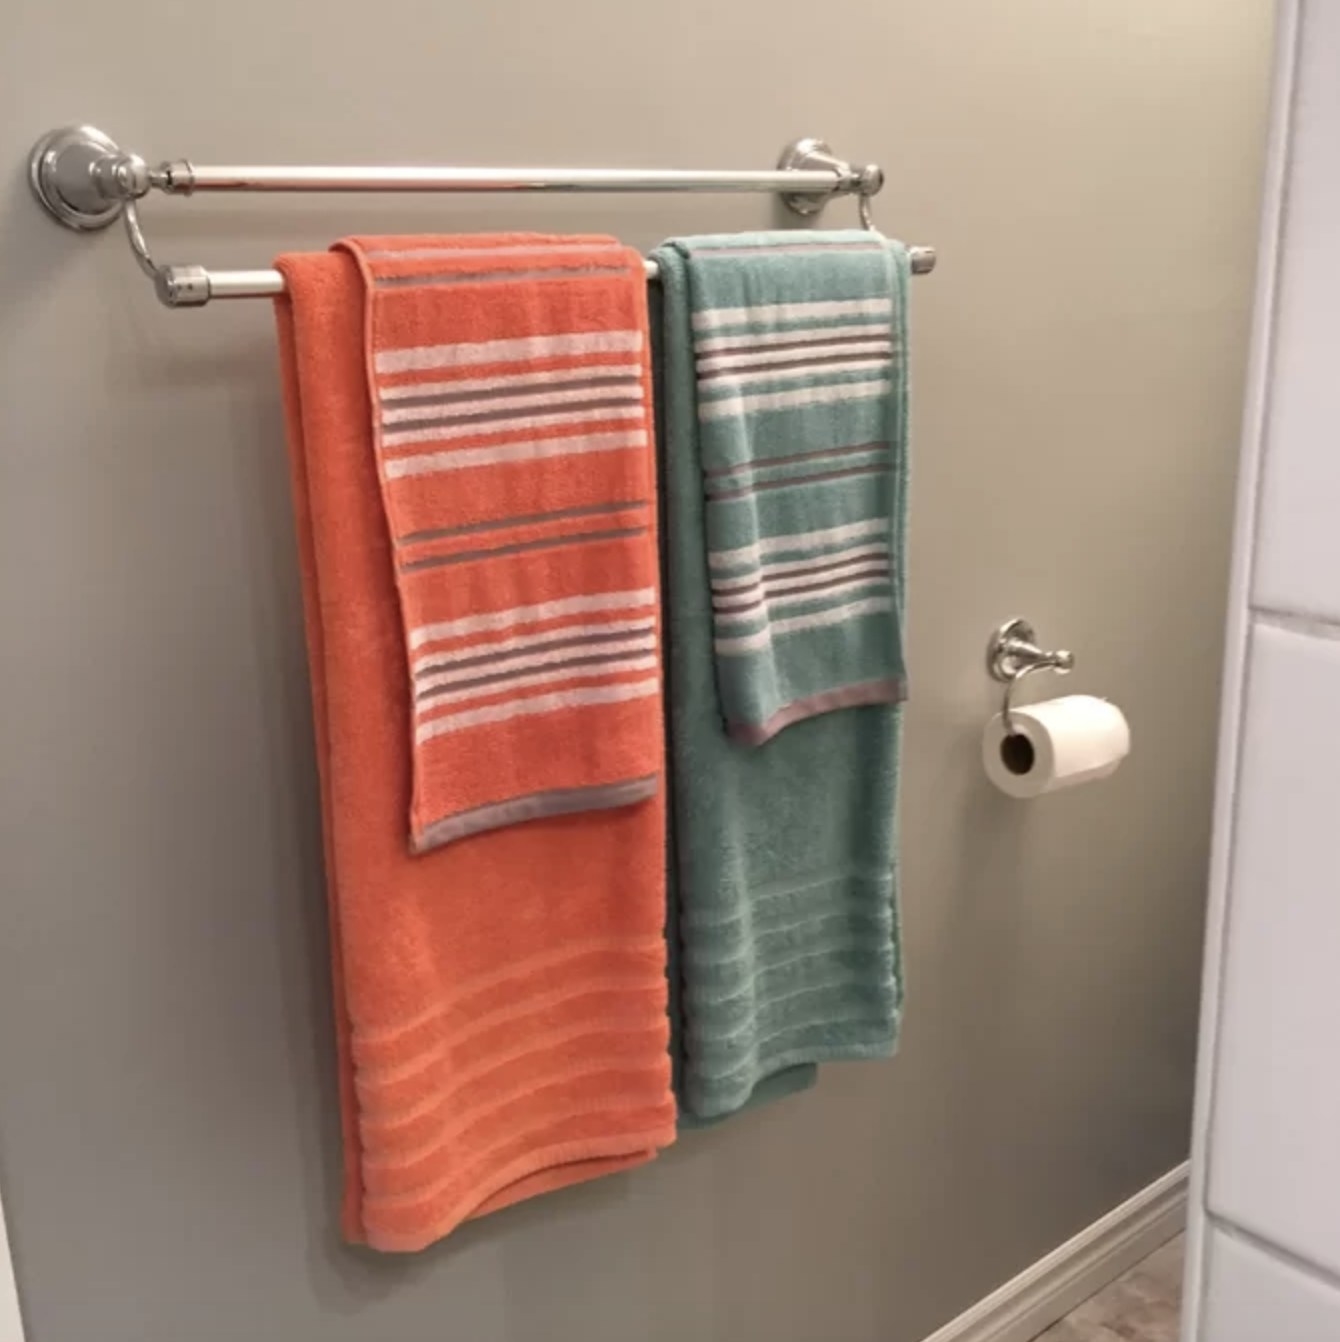 The orange and teal striped towels are hung in a bathroom